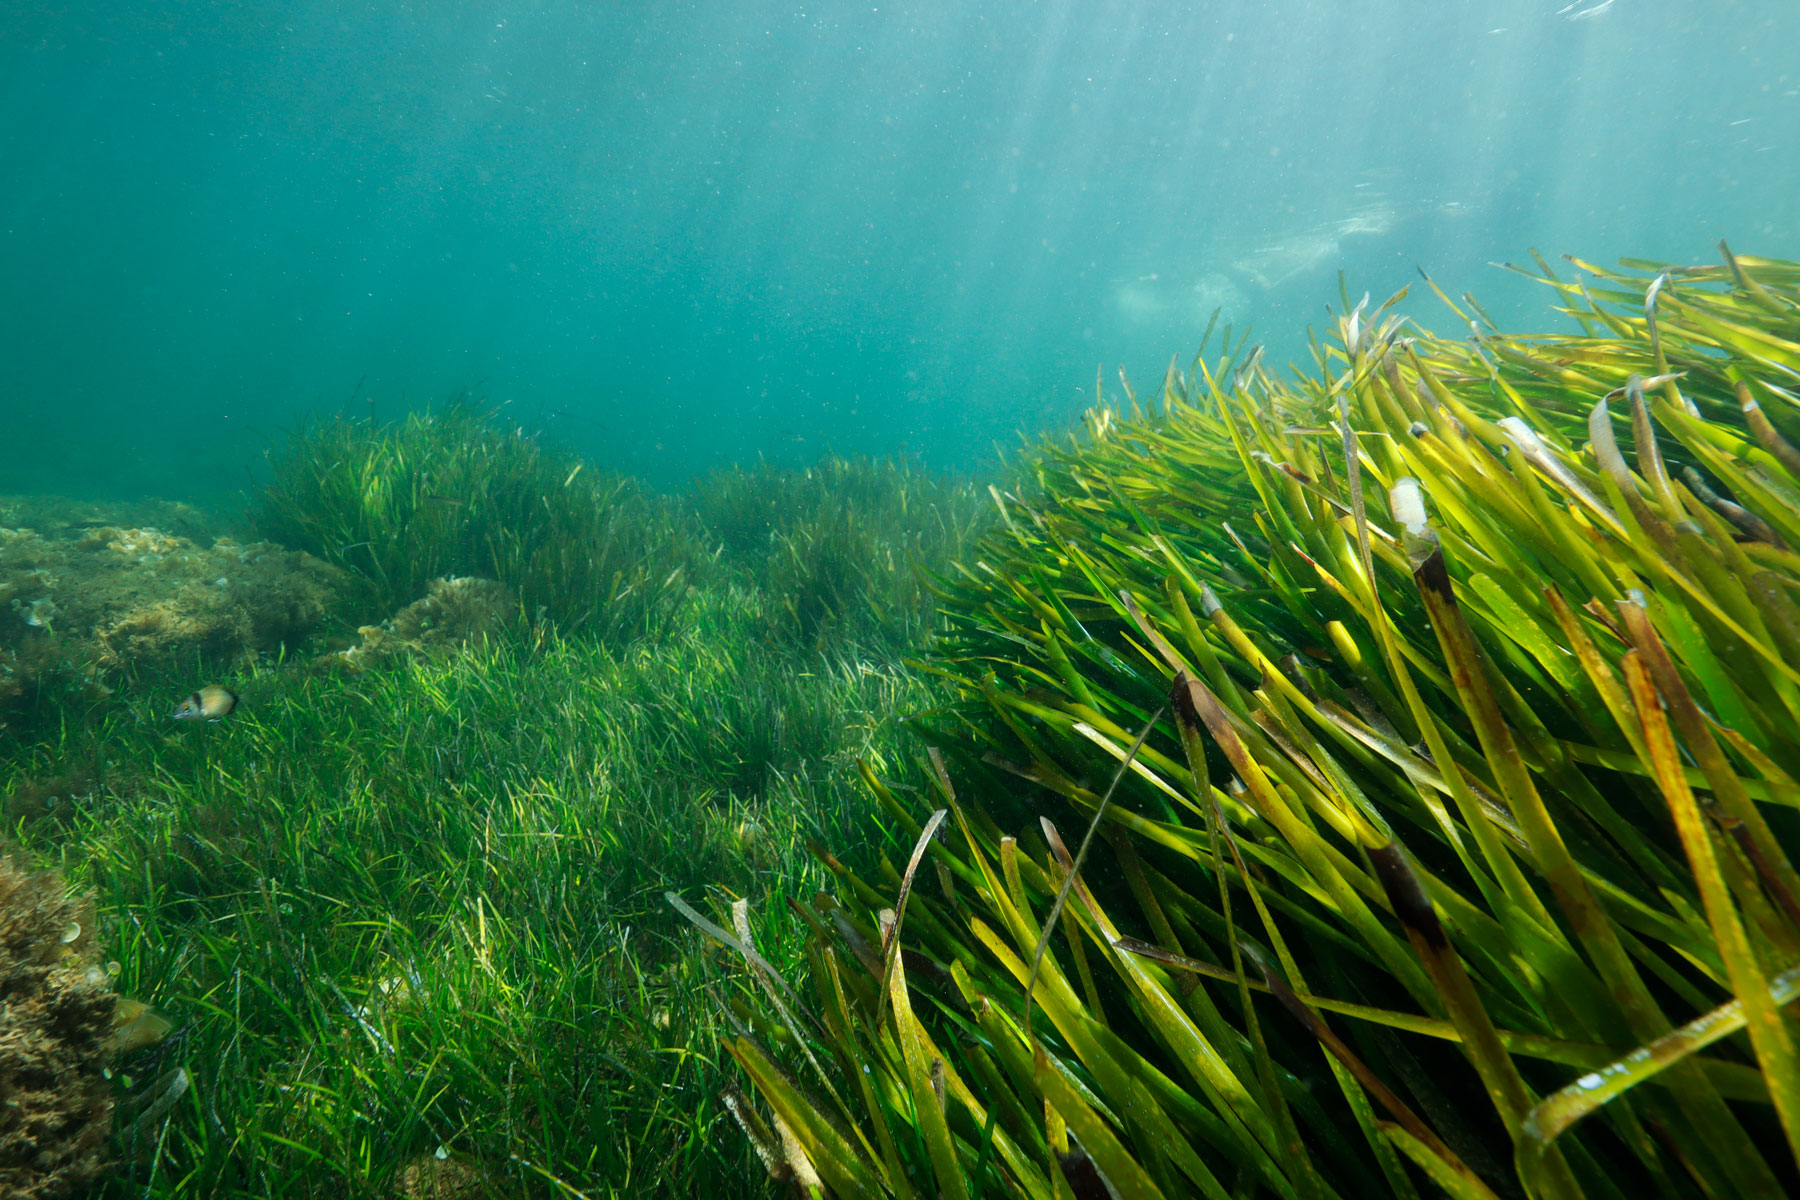 The Blue Economy | World Seagrass Day